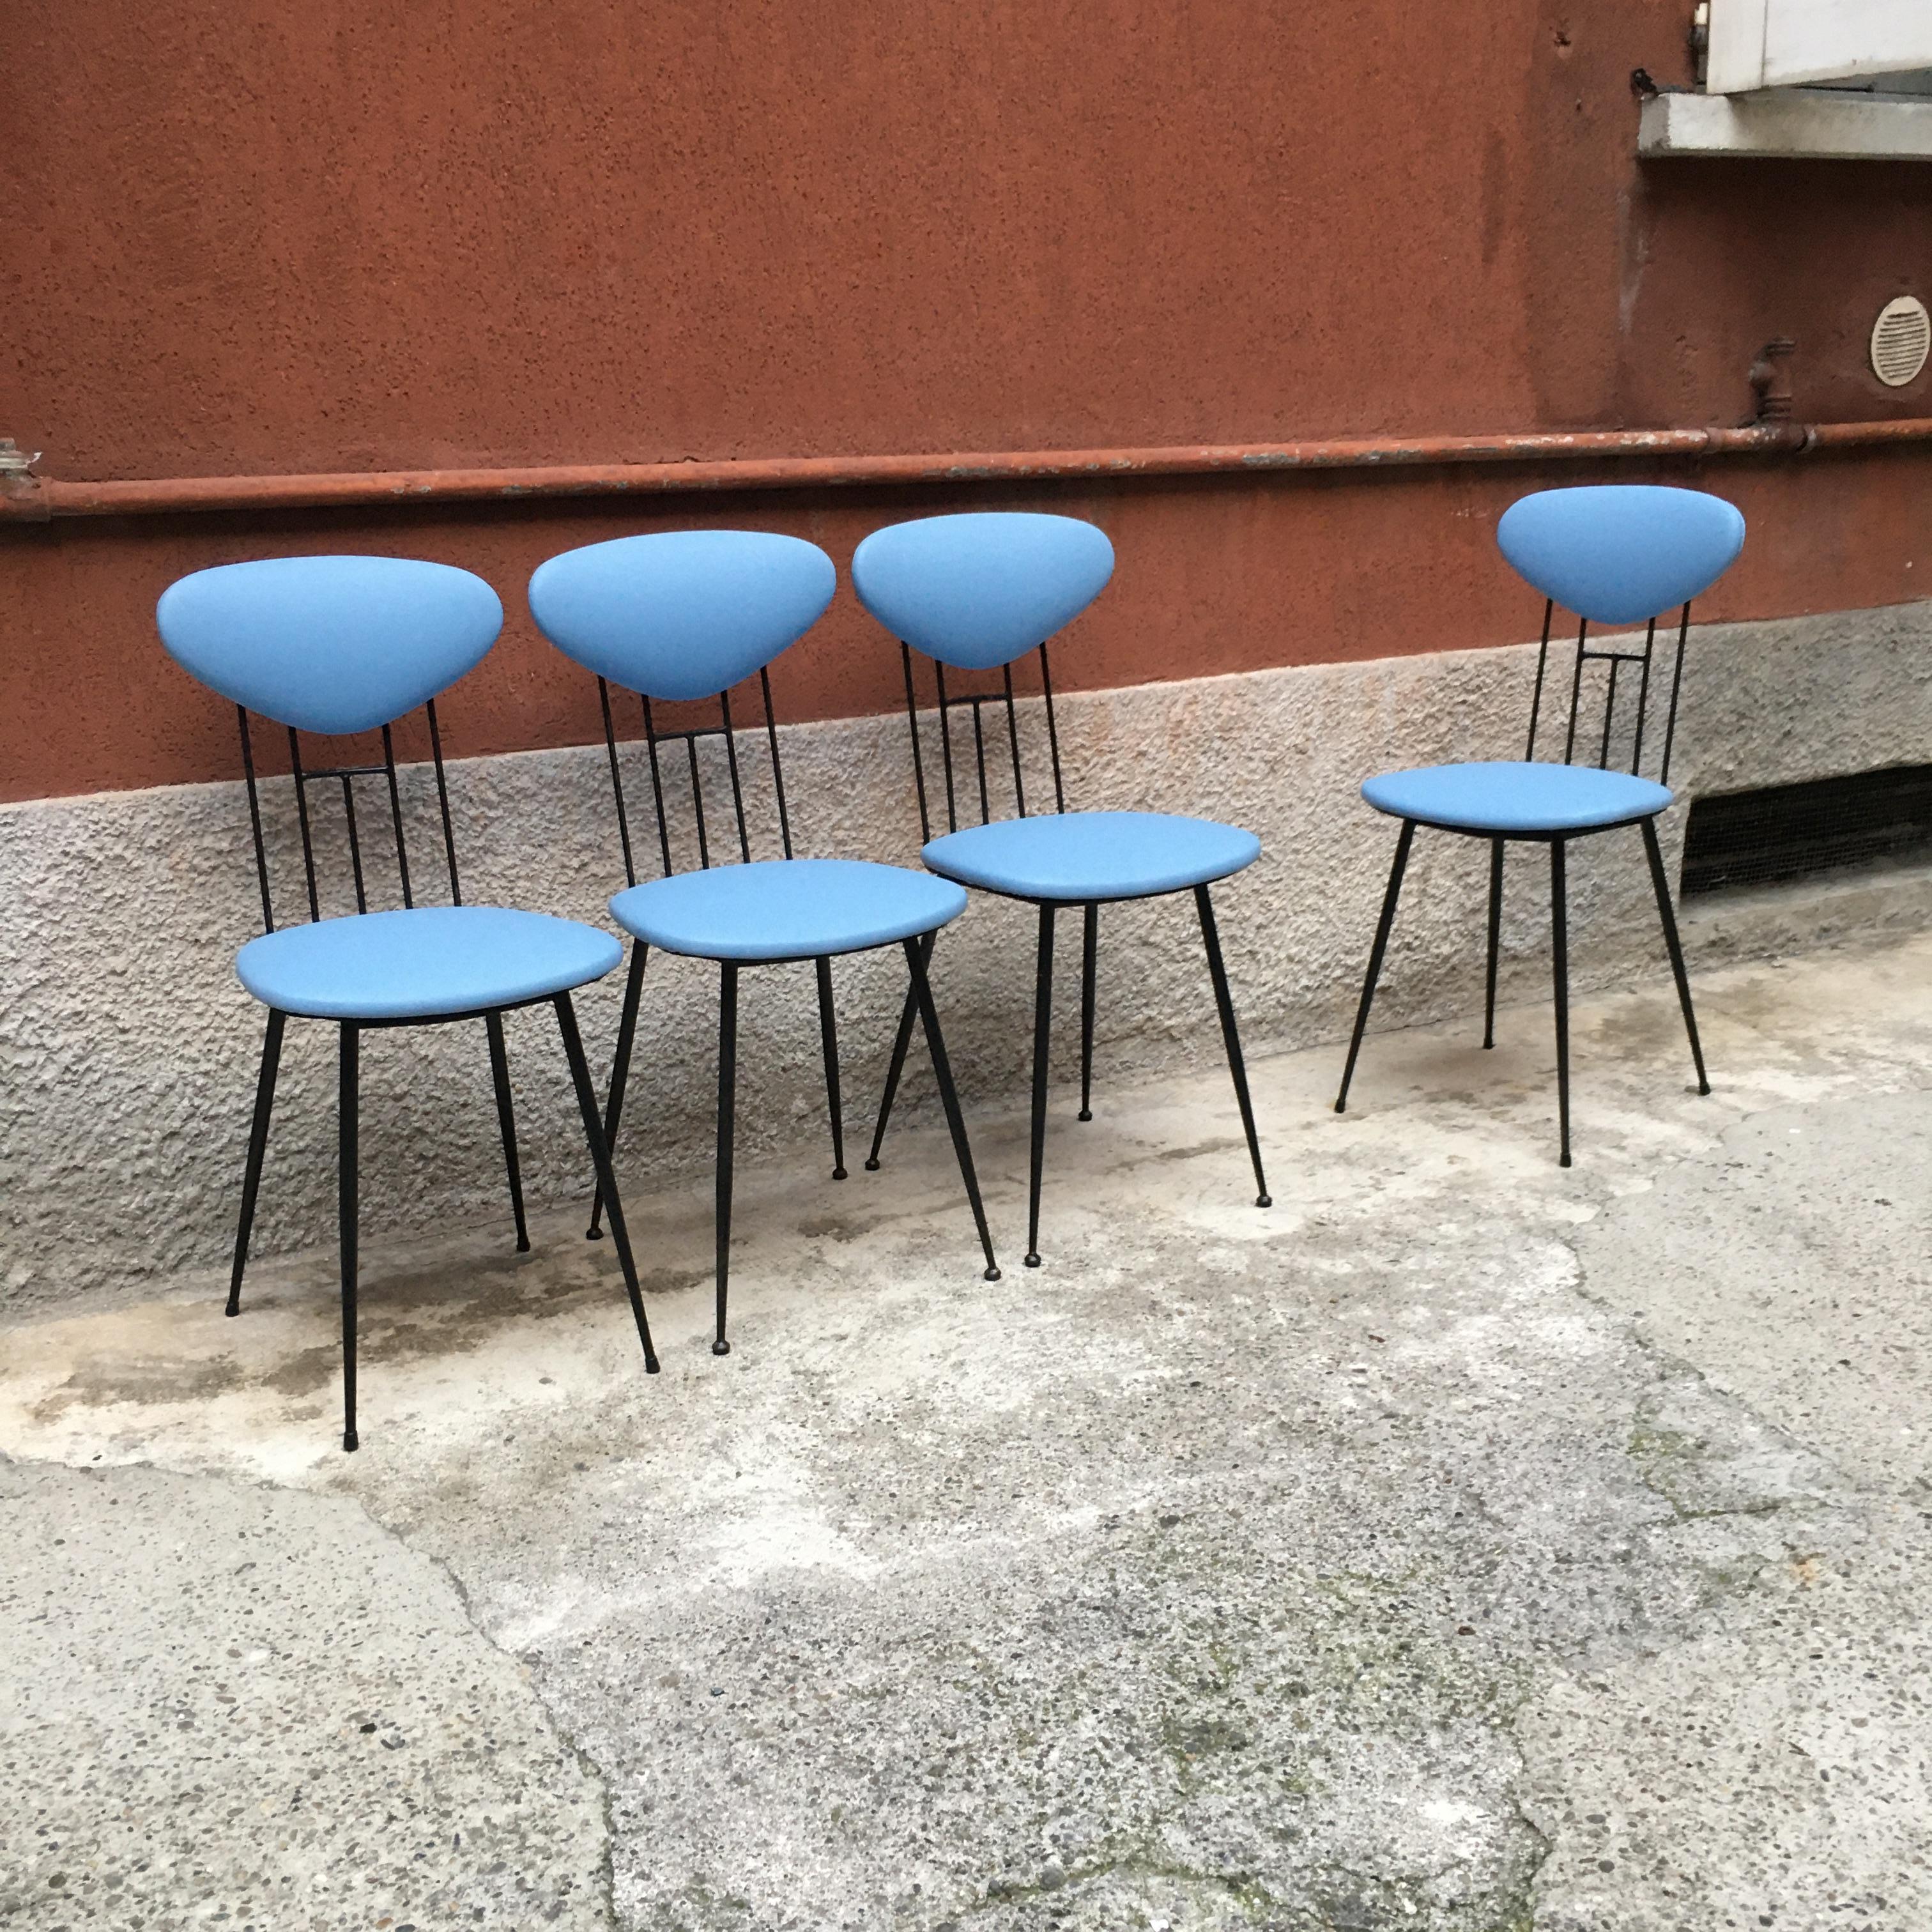 Italian light-blue leatherette and black metal chair, 1980s
Chair with structure in enameled metal rod and light-blue leatherette upholstered seat and backrest covered
Perfect conditions.